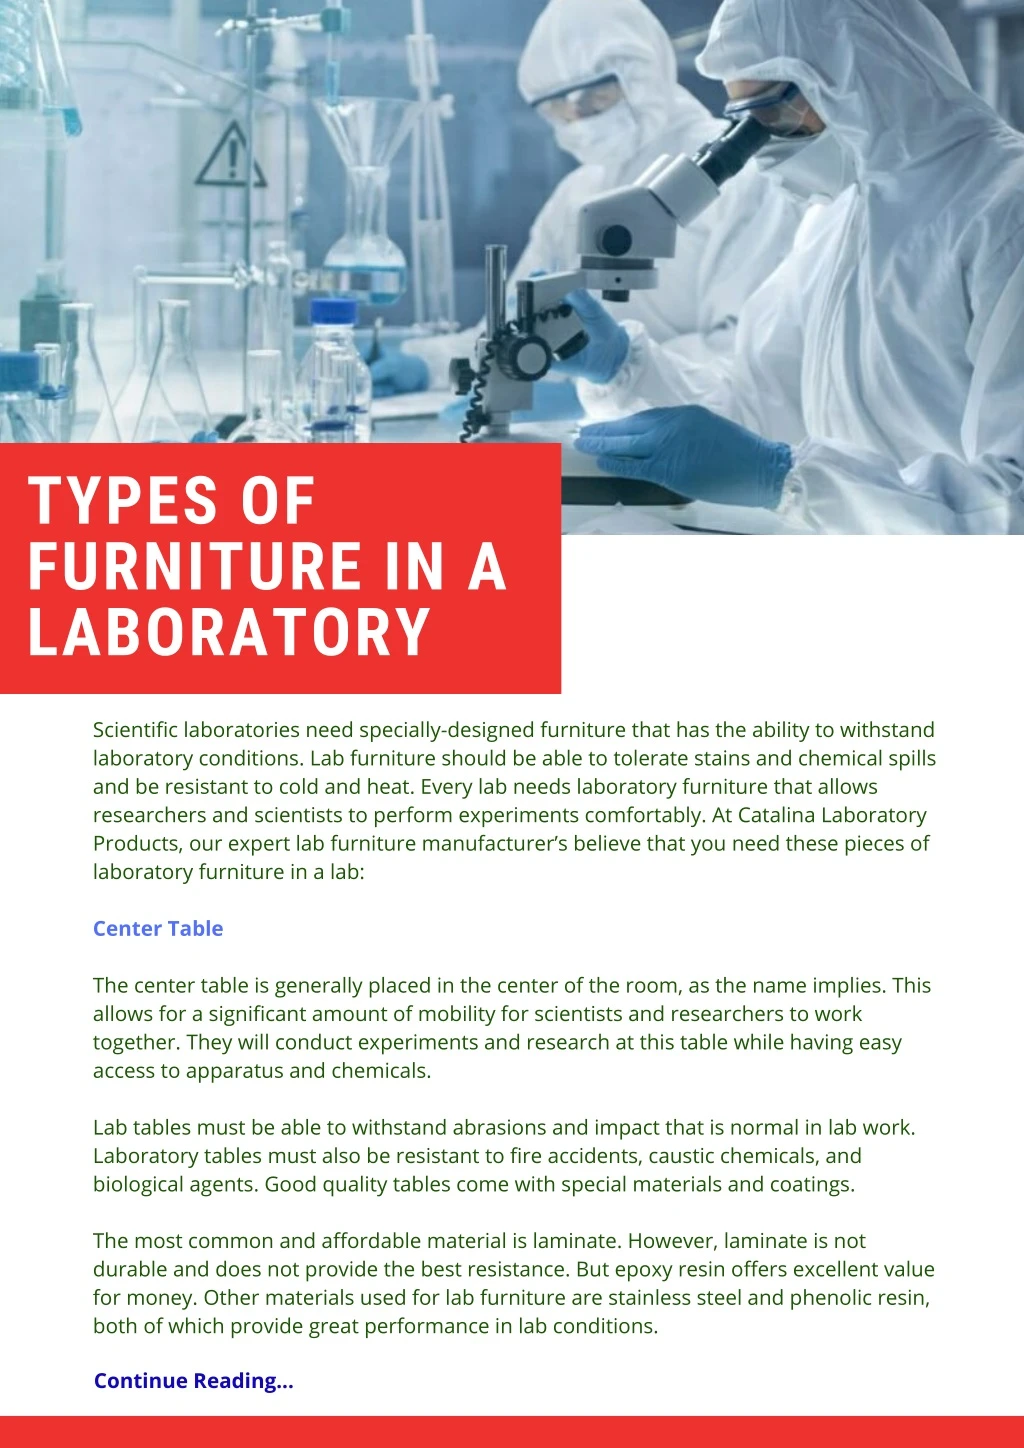 types of furniture in a laboratory